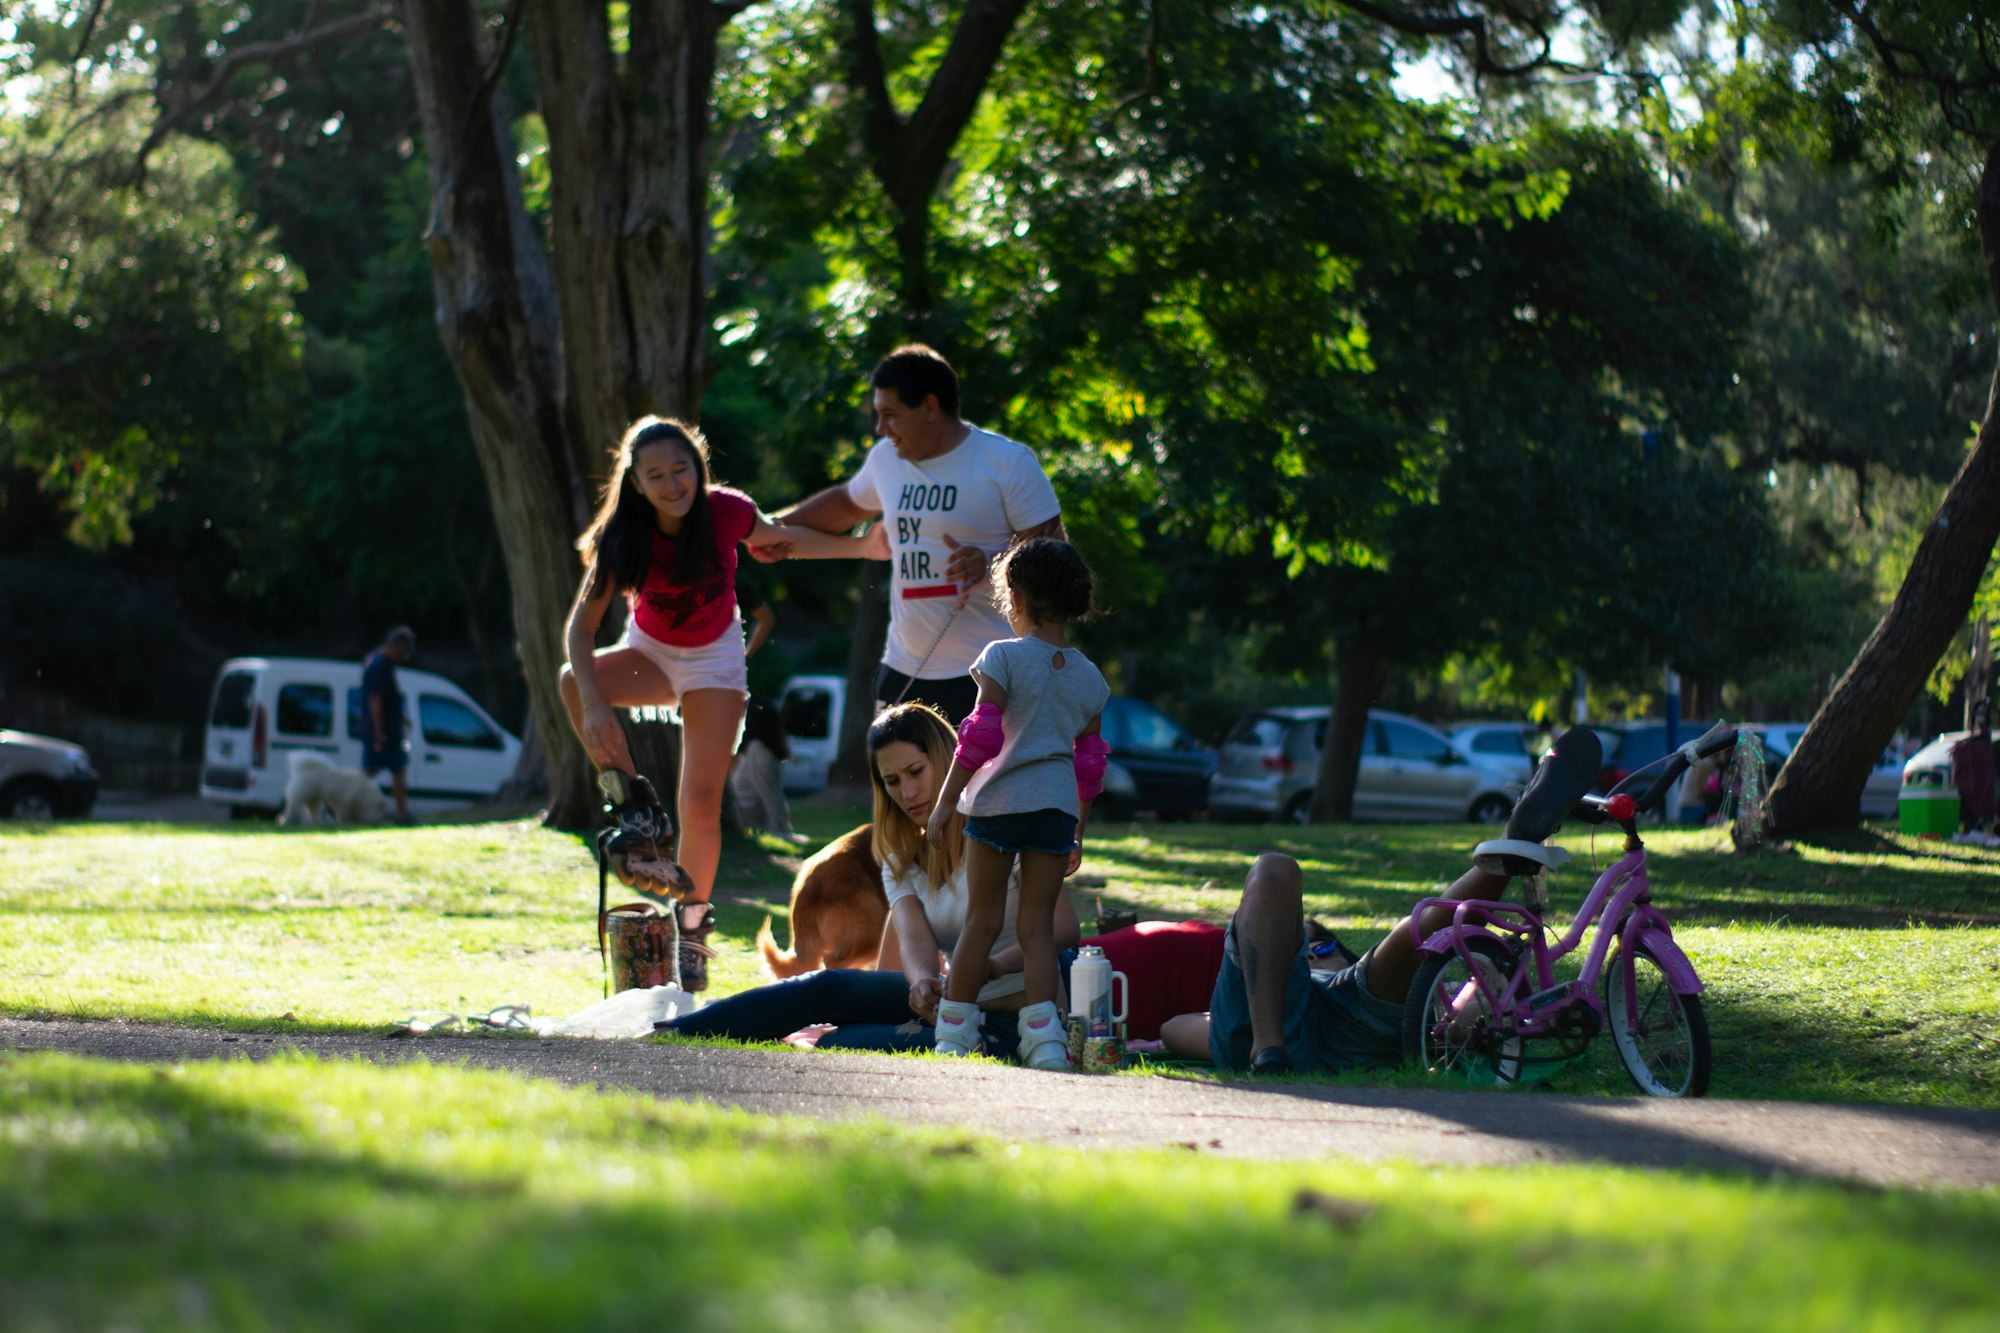 Family having a picnic on a Sunday afternoon.
La plata, Argentina. 